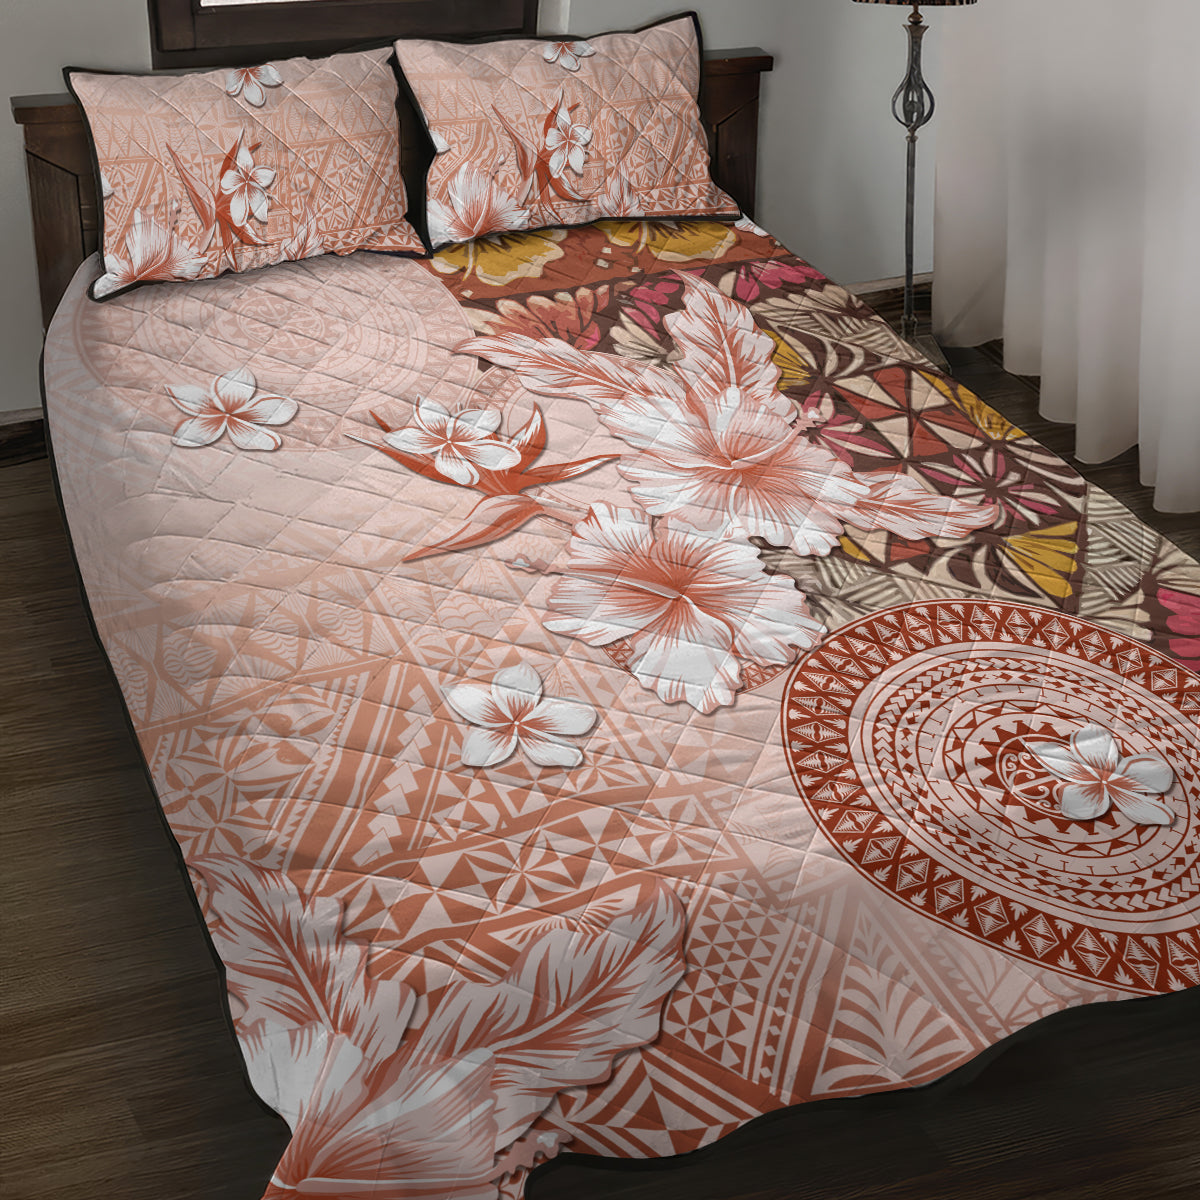 Tonga Ngatu Pattern With Light Tabasco Hibiscus Quilt Bed Set Oil Painting Style